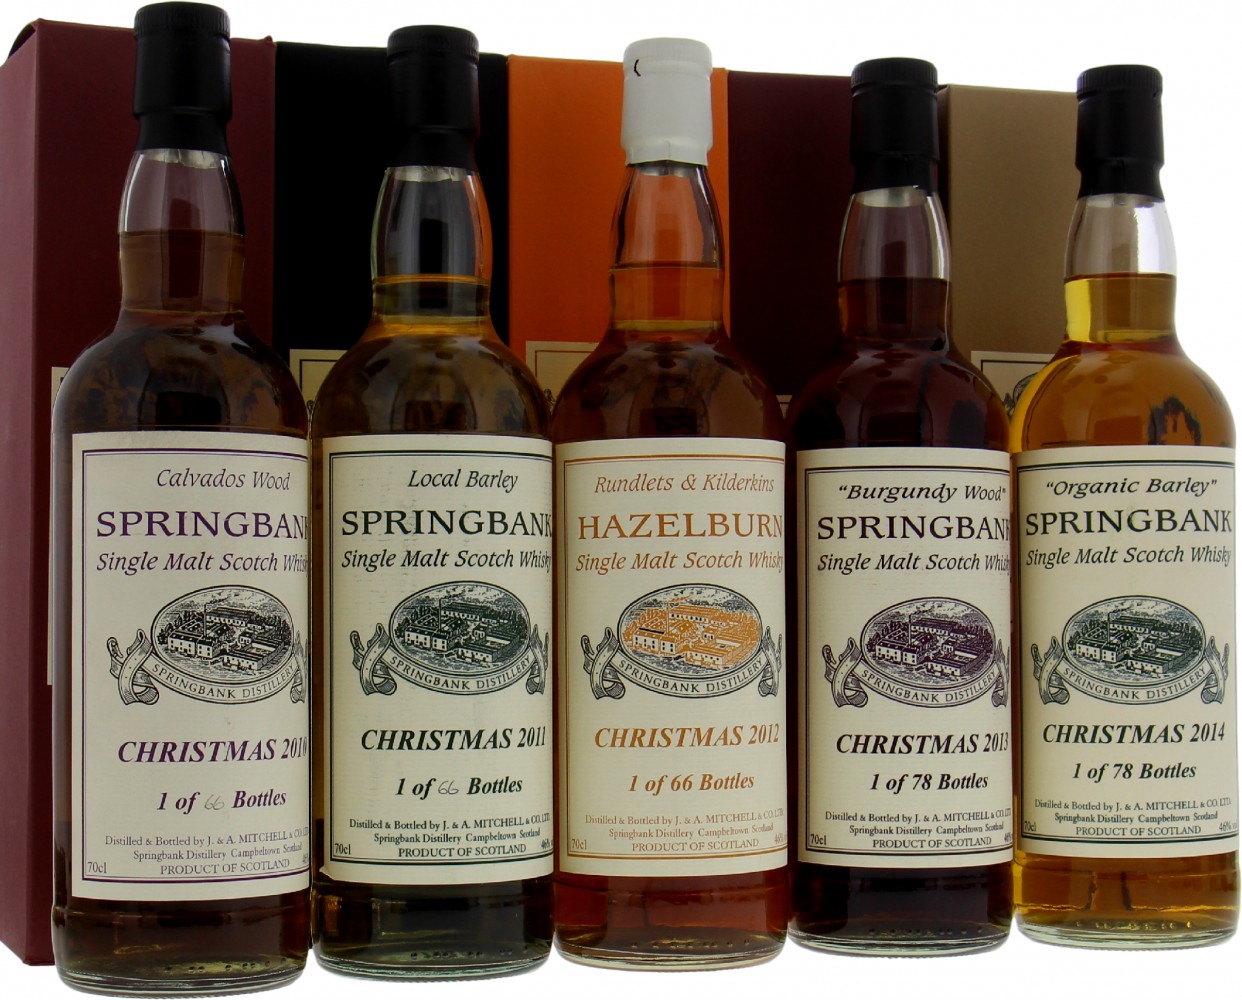 Springbank - Christmas Set of 5 bottles Editions:2010, 2011, 2012, 2013 & 2014 NV In Original Container